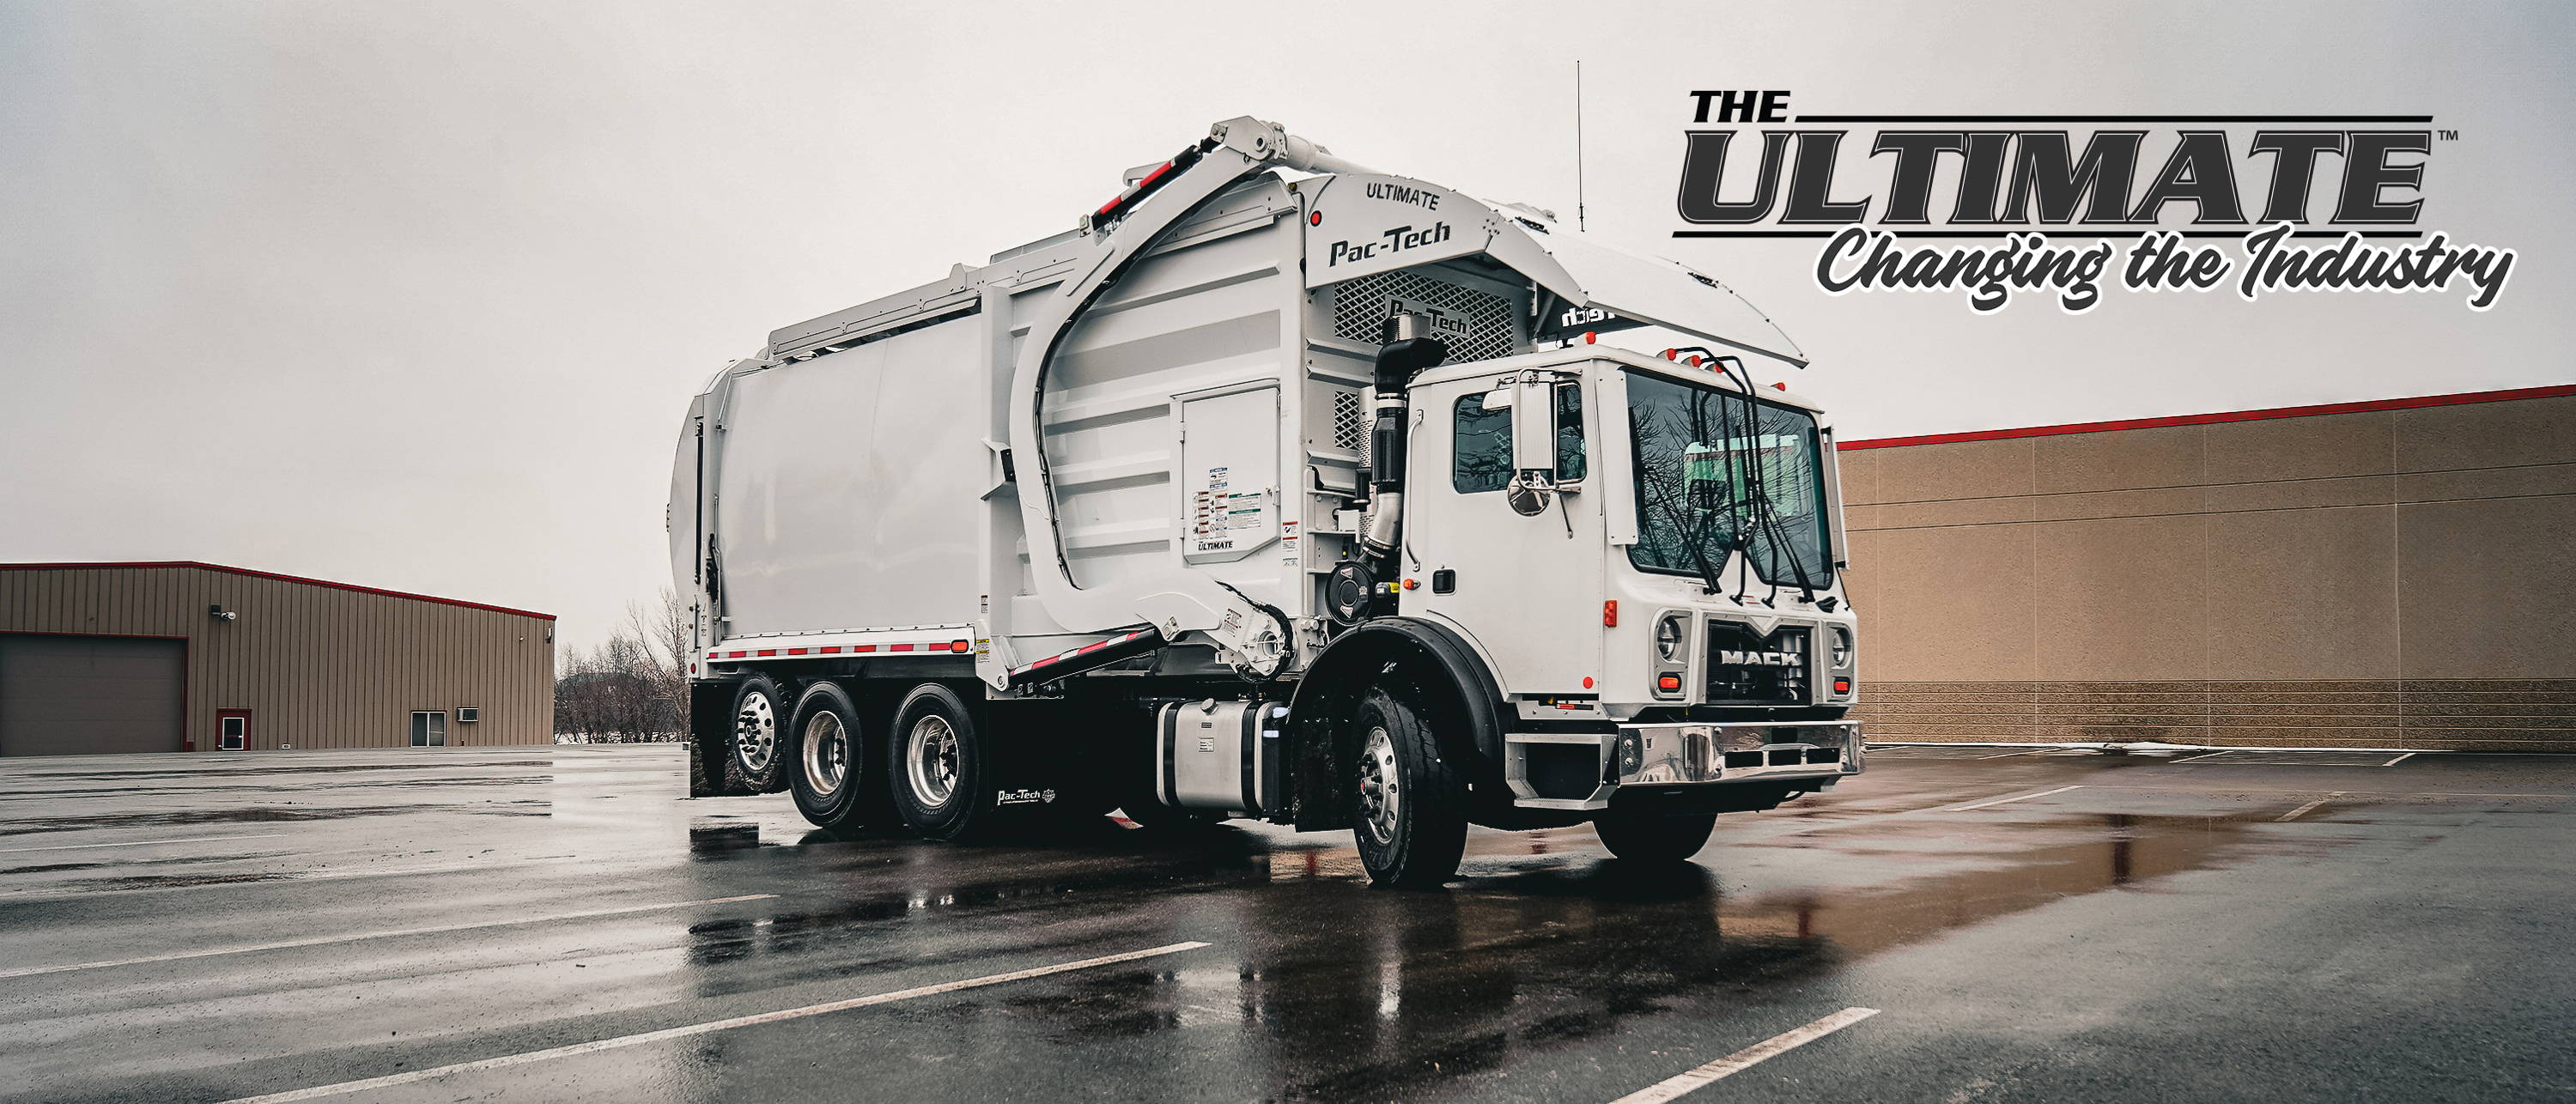 The Ultimate Front Loader Garbage Truck